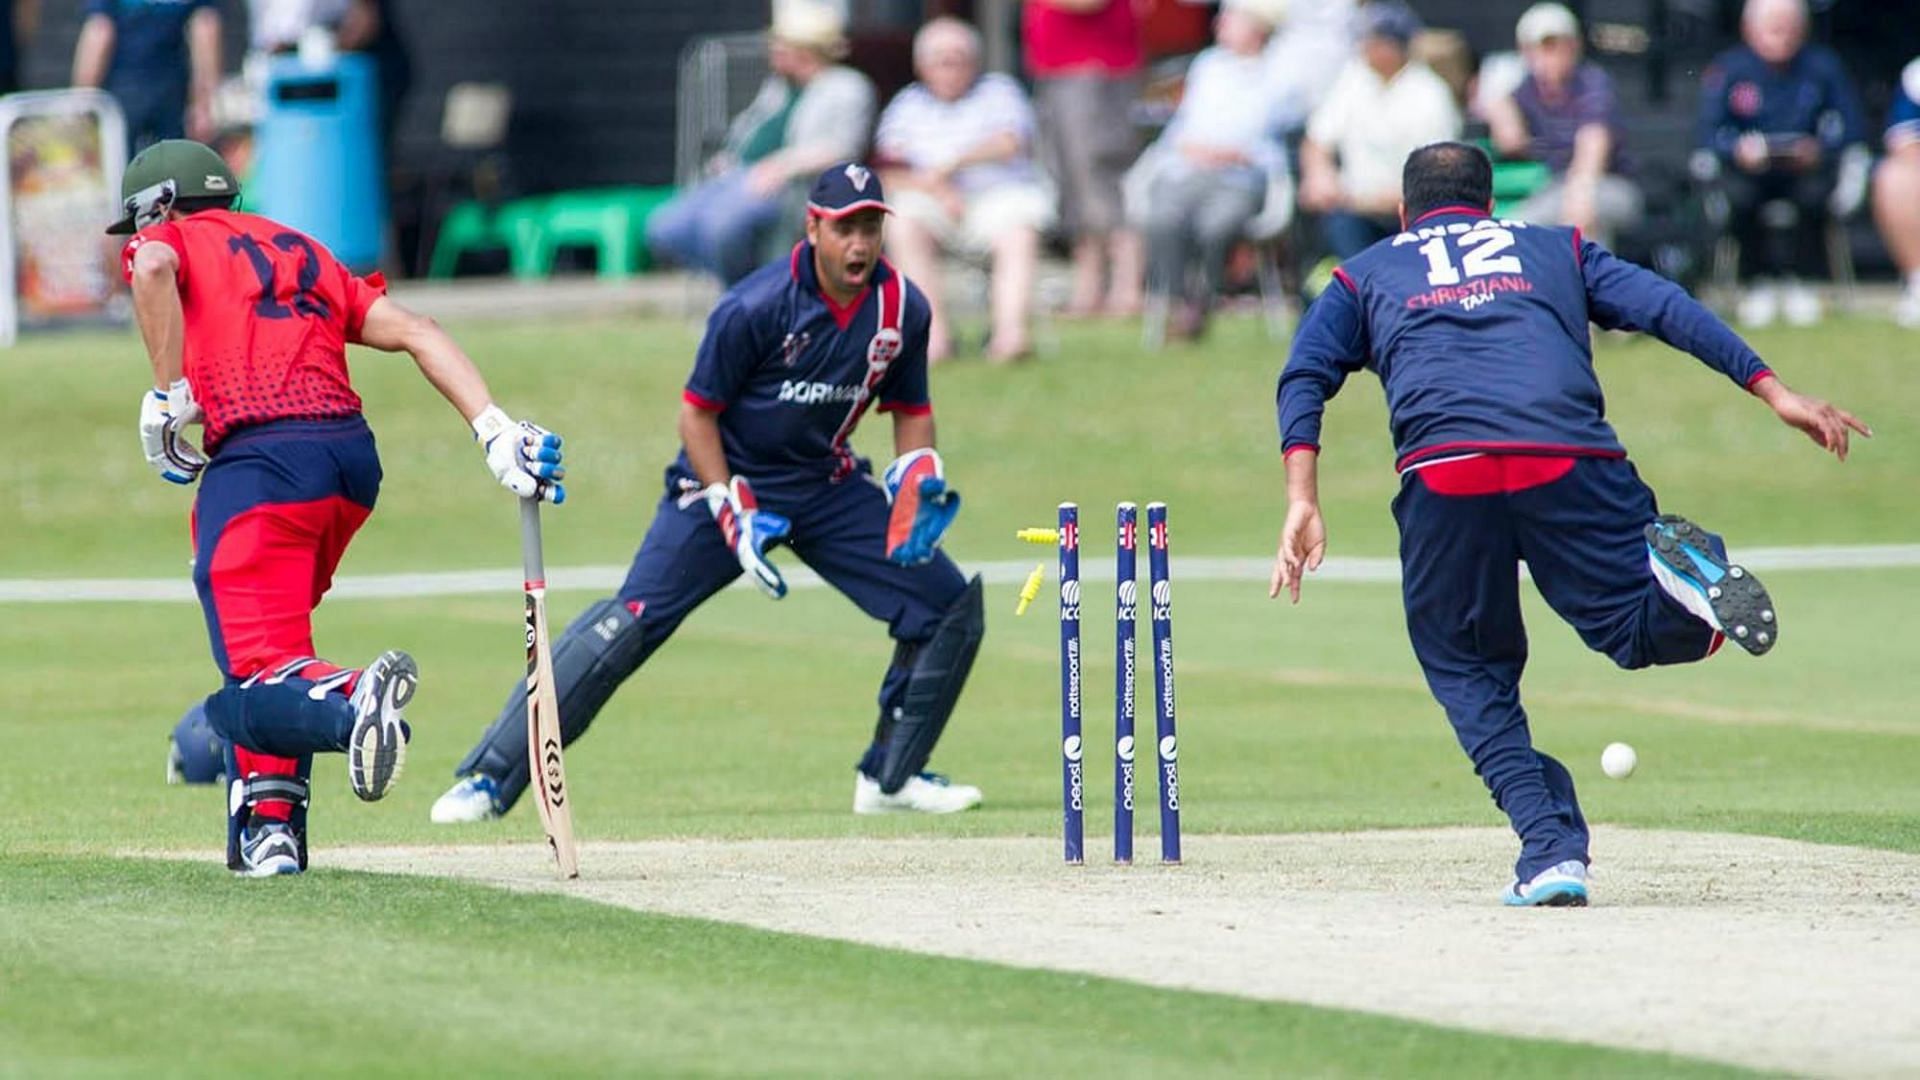 The Norway cricket team in action (Image Courtesy: ICC)